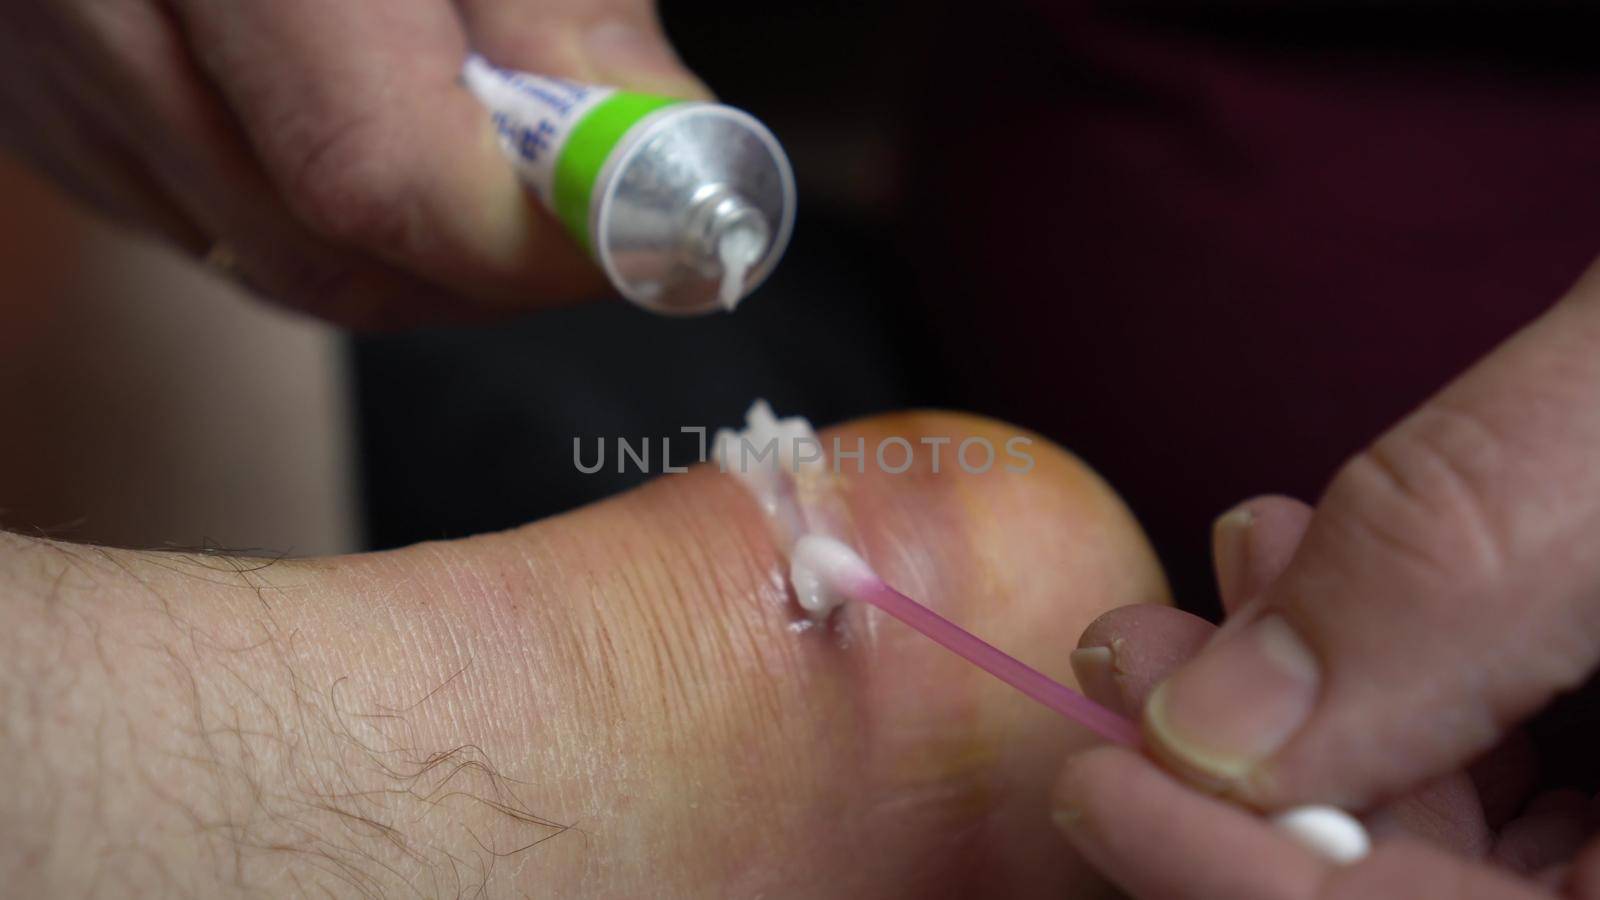 Application of ointment to heal a wound on the leg. Surgical incision of the ankle joint for inflammation. 4k